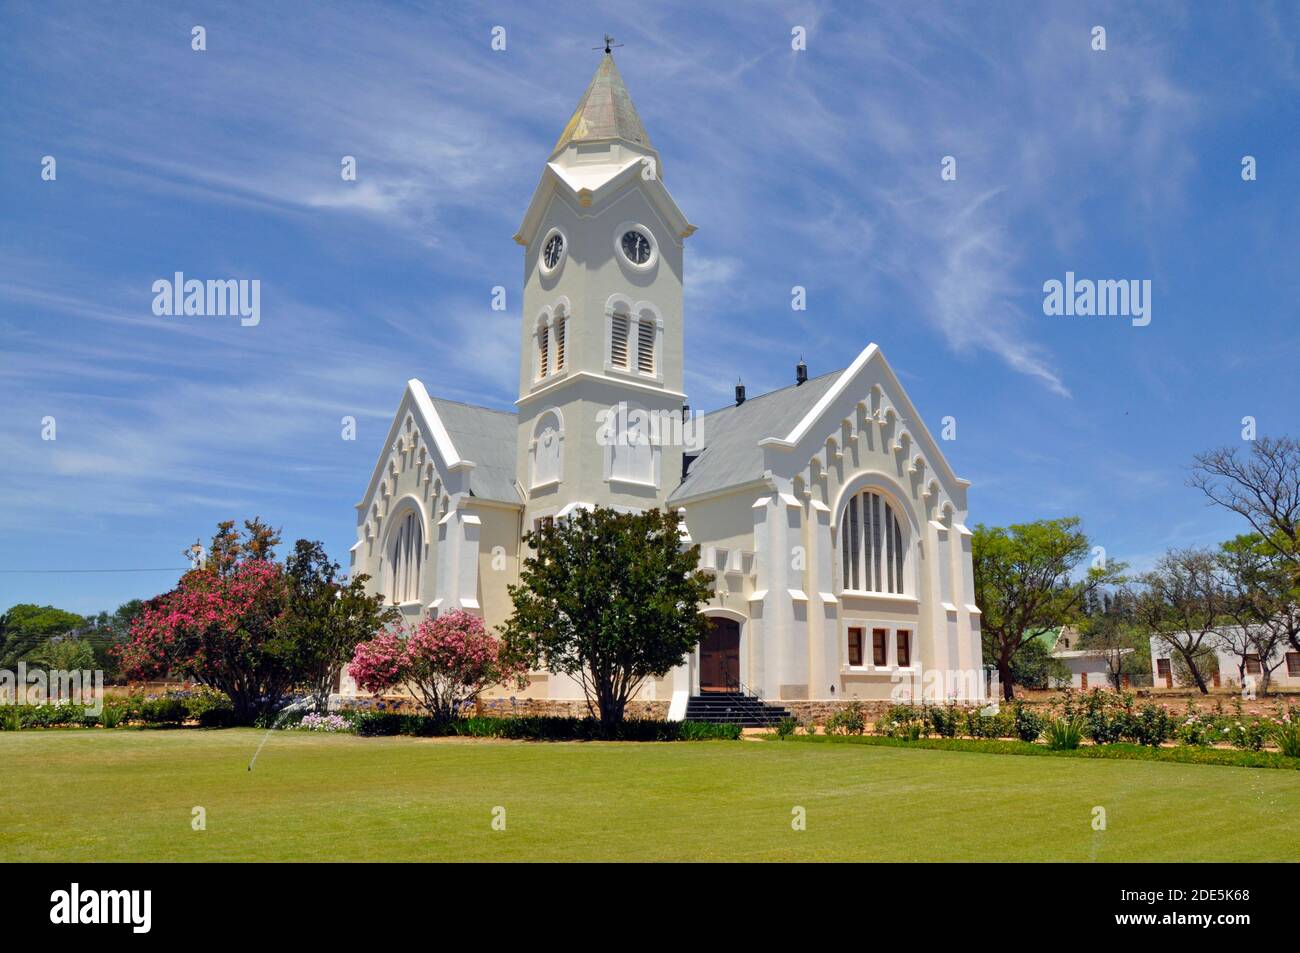 The Dutch Reformed Church in McGregor. The village was originally called Lady Grey but was renamed in 1904 after its pastor, the Rev. Andrew McGregor. Stock Photo